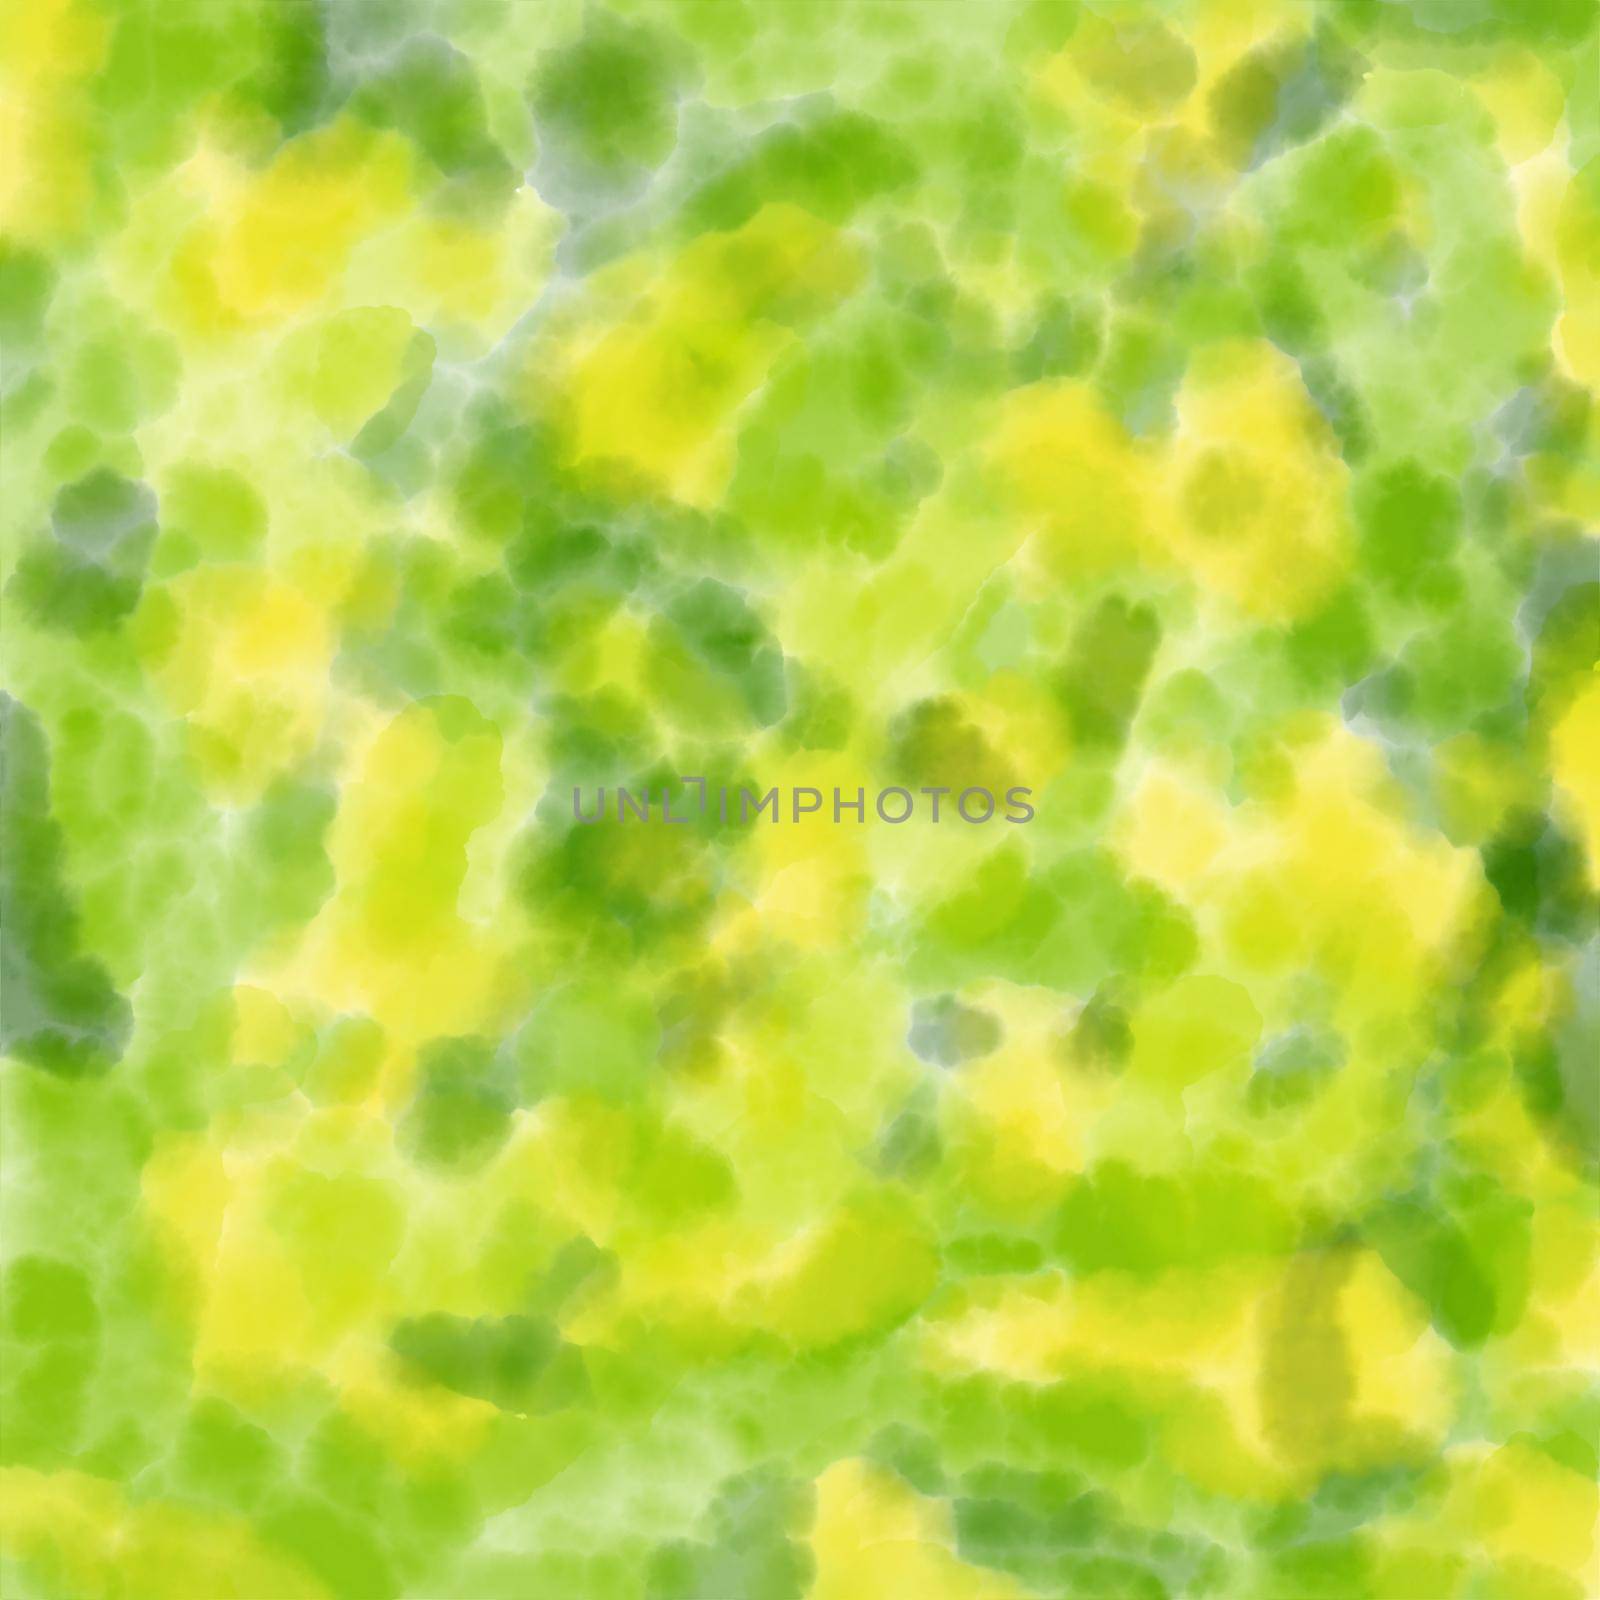 watercolor green abstract background represent ecology used for any artworks by tidarattj